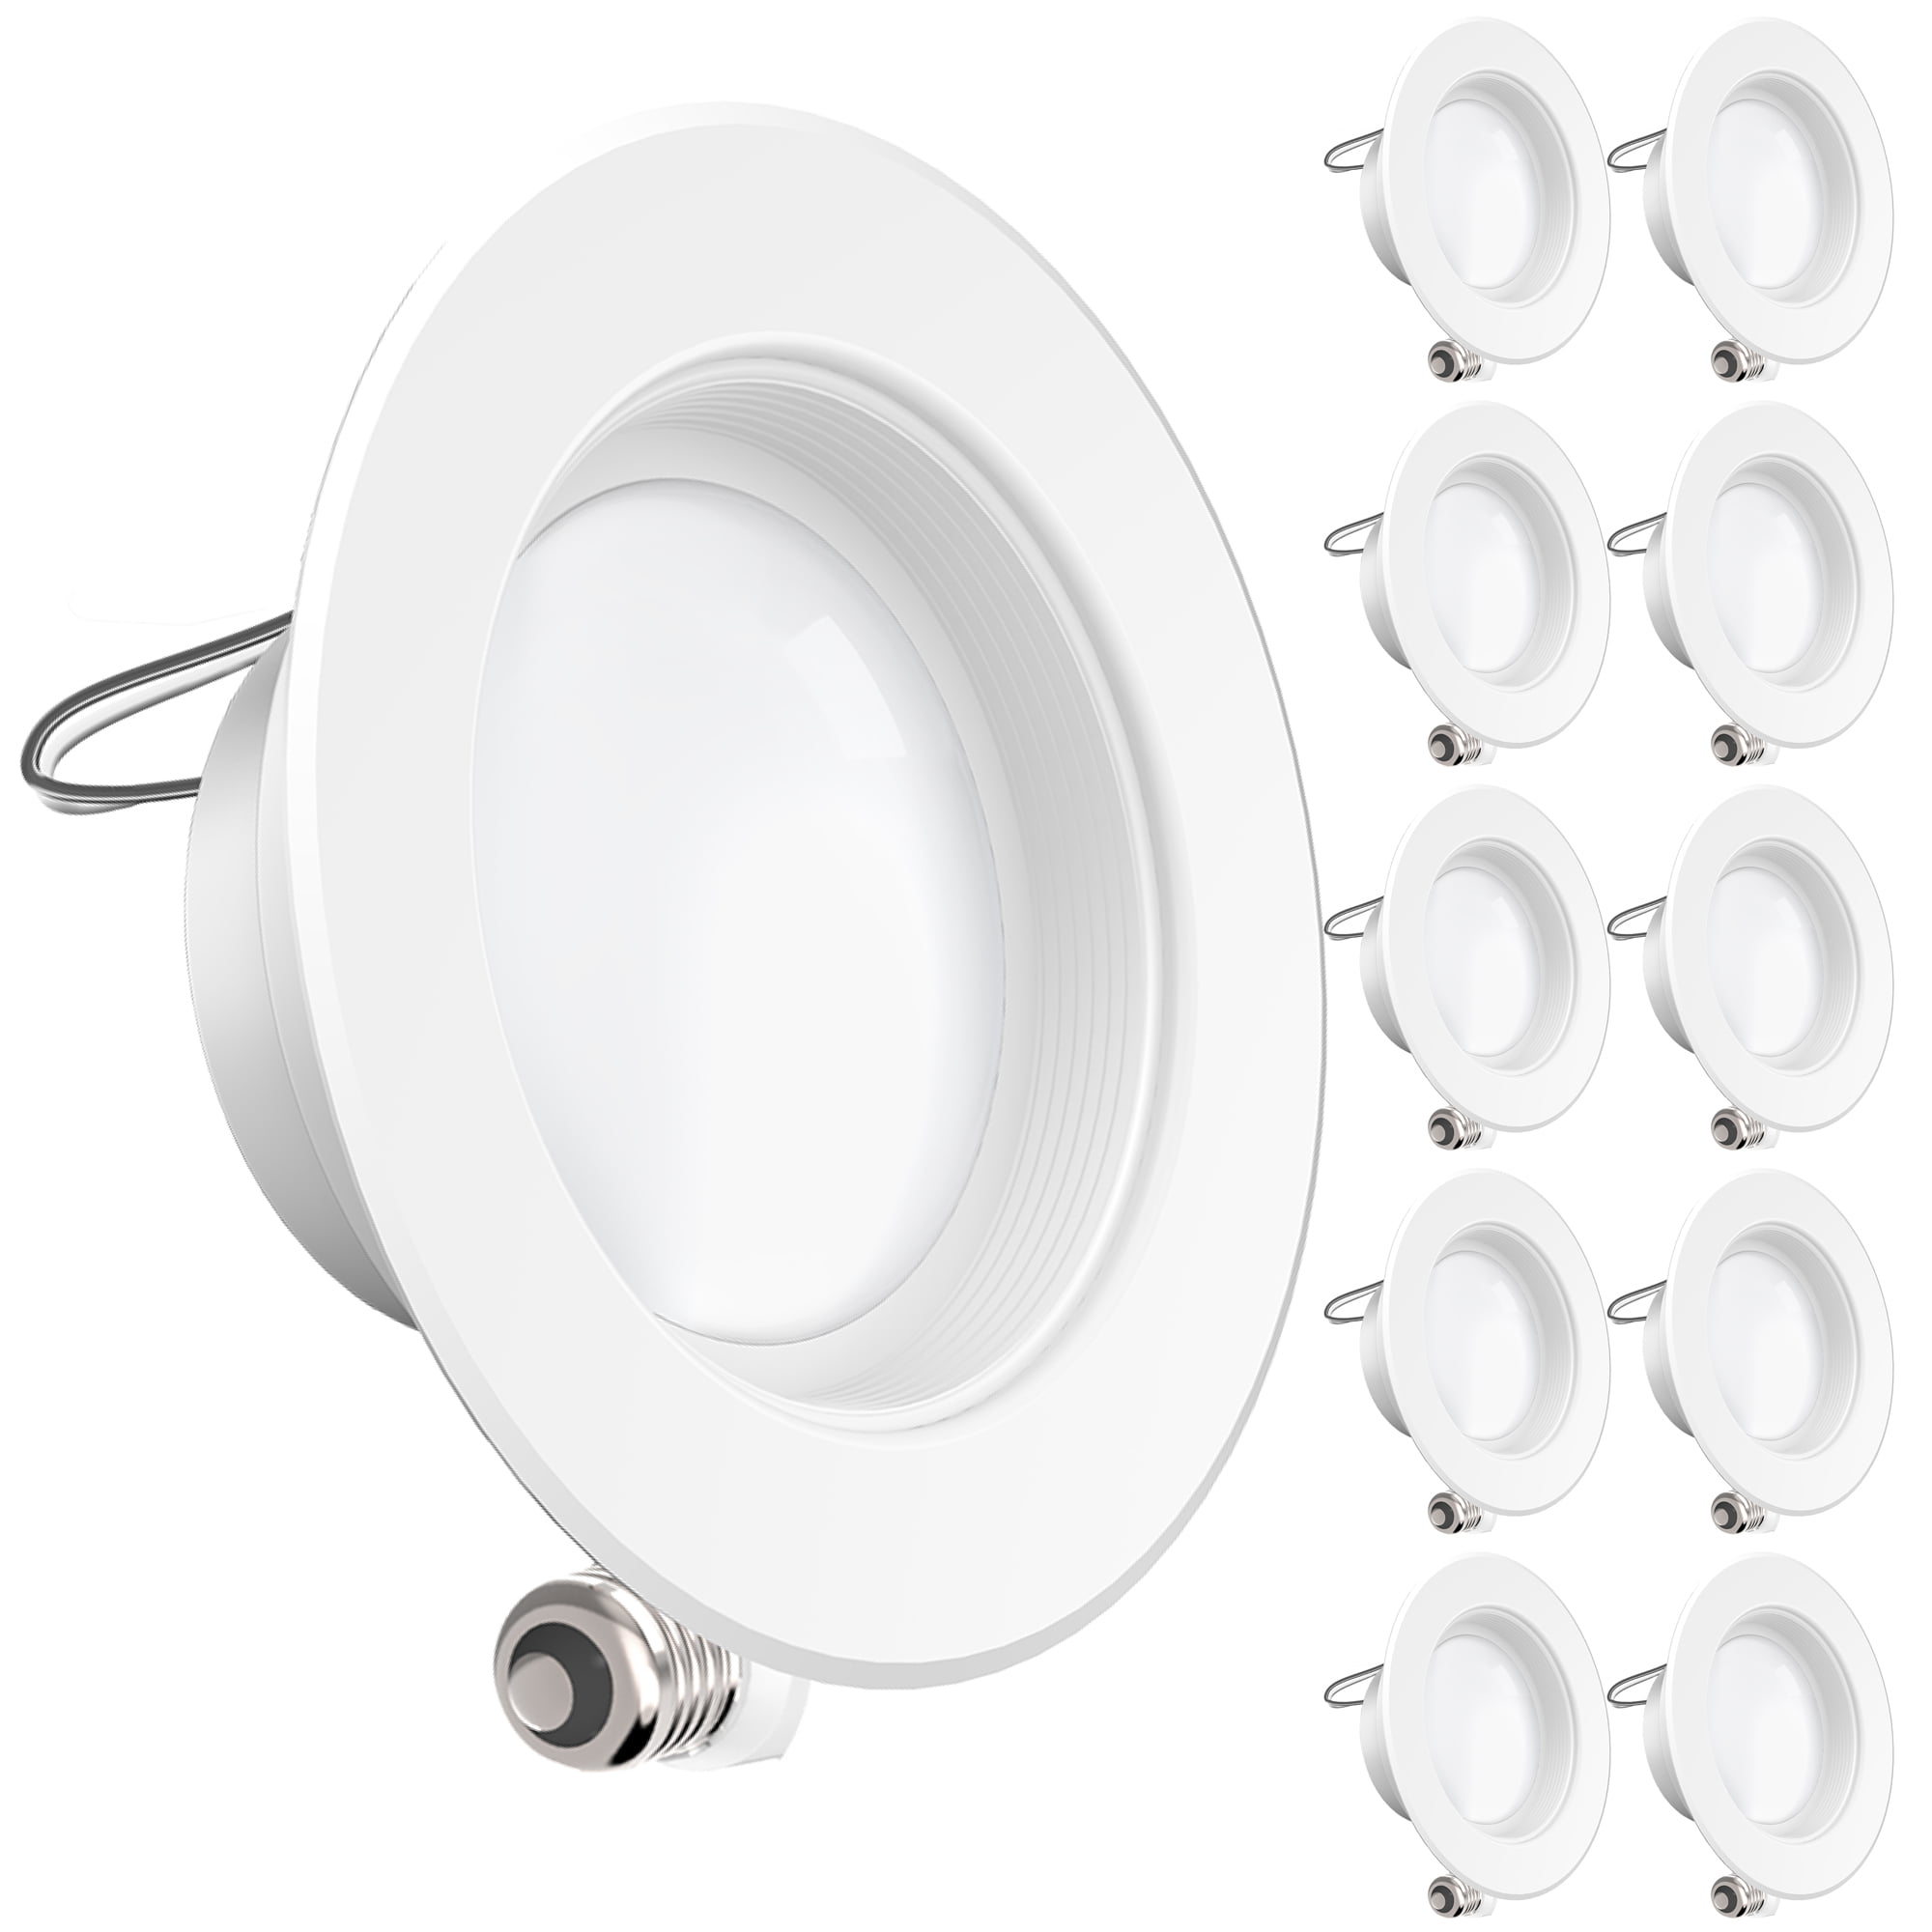 11Watt 4- Inch ENERGY STAR UL-Listed Dimmable LED Downlight Retrofit Baffle Recessed Lighting Kit Fixture 600LM 4000K Cool White LED Ceiling Light SUNCO 10 PACK Wet Location CRI 90 